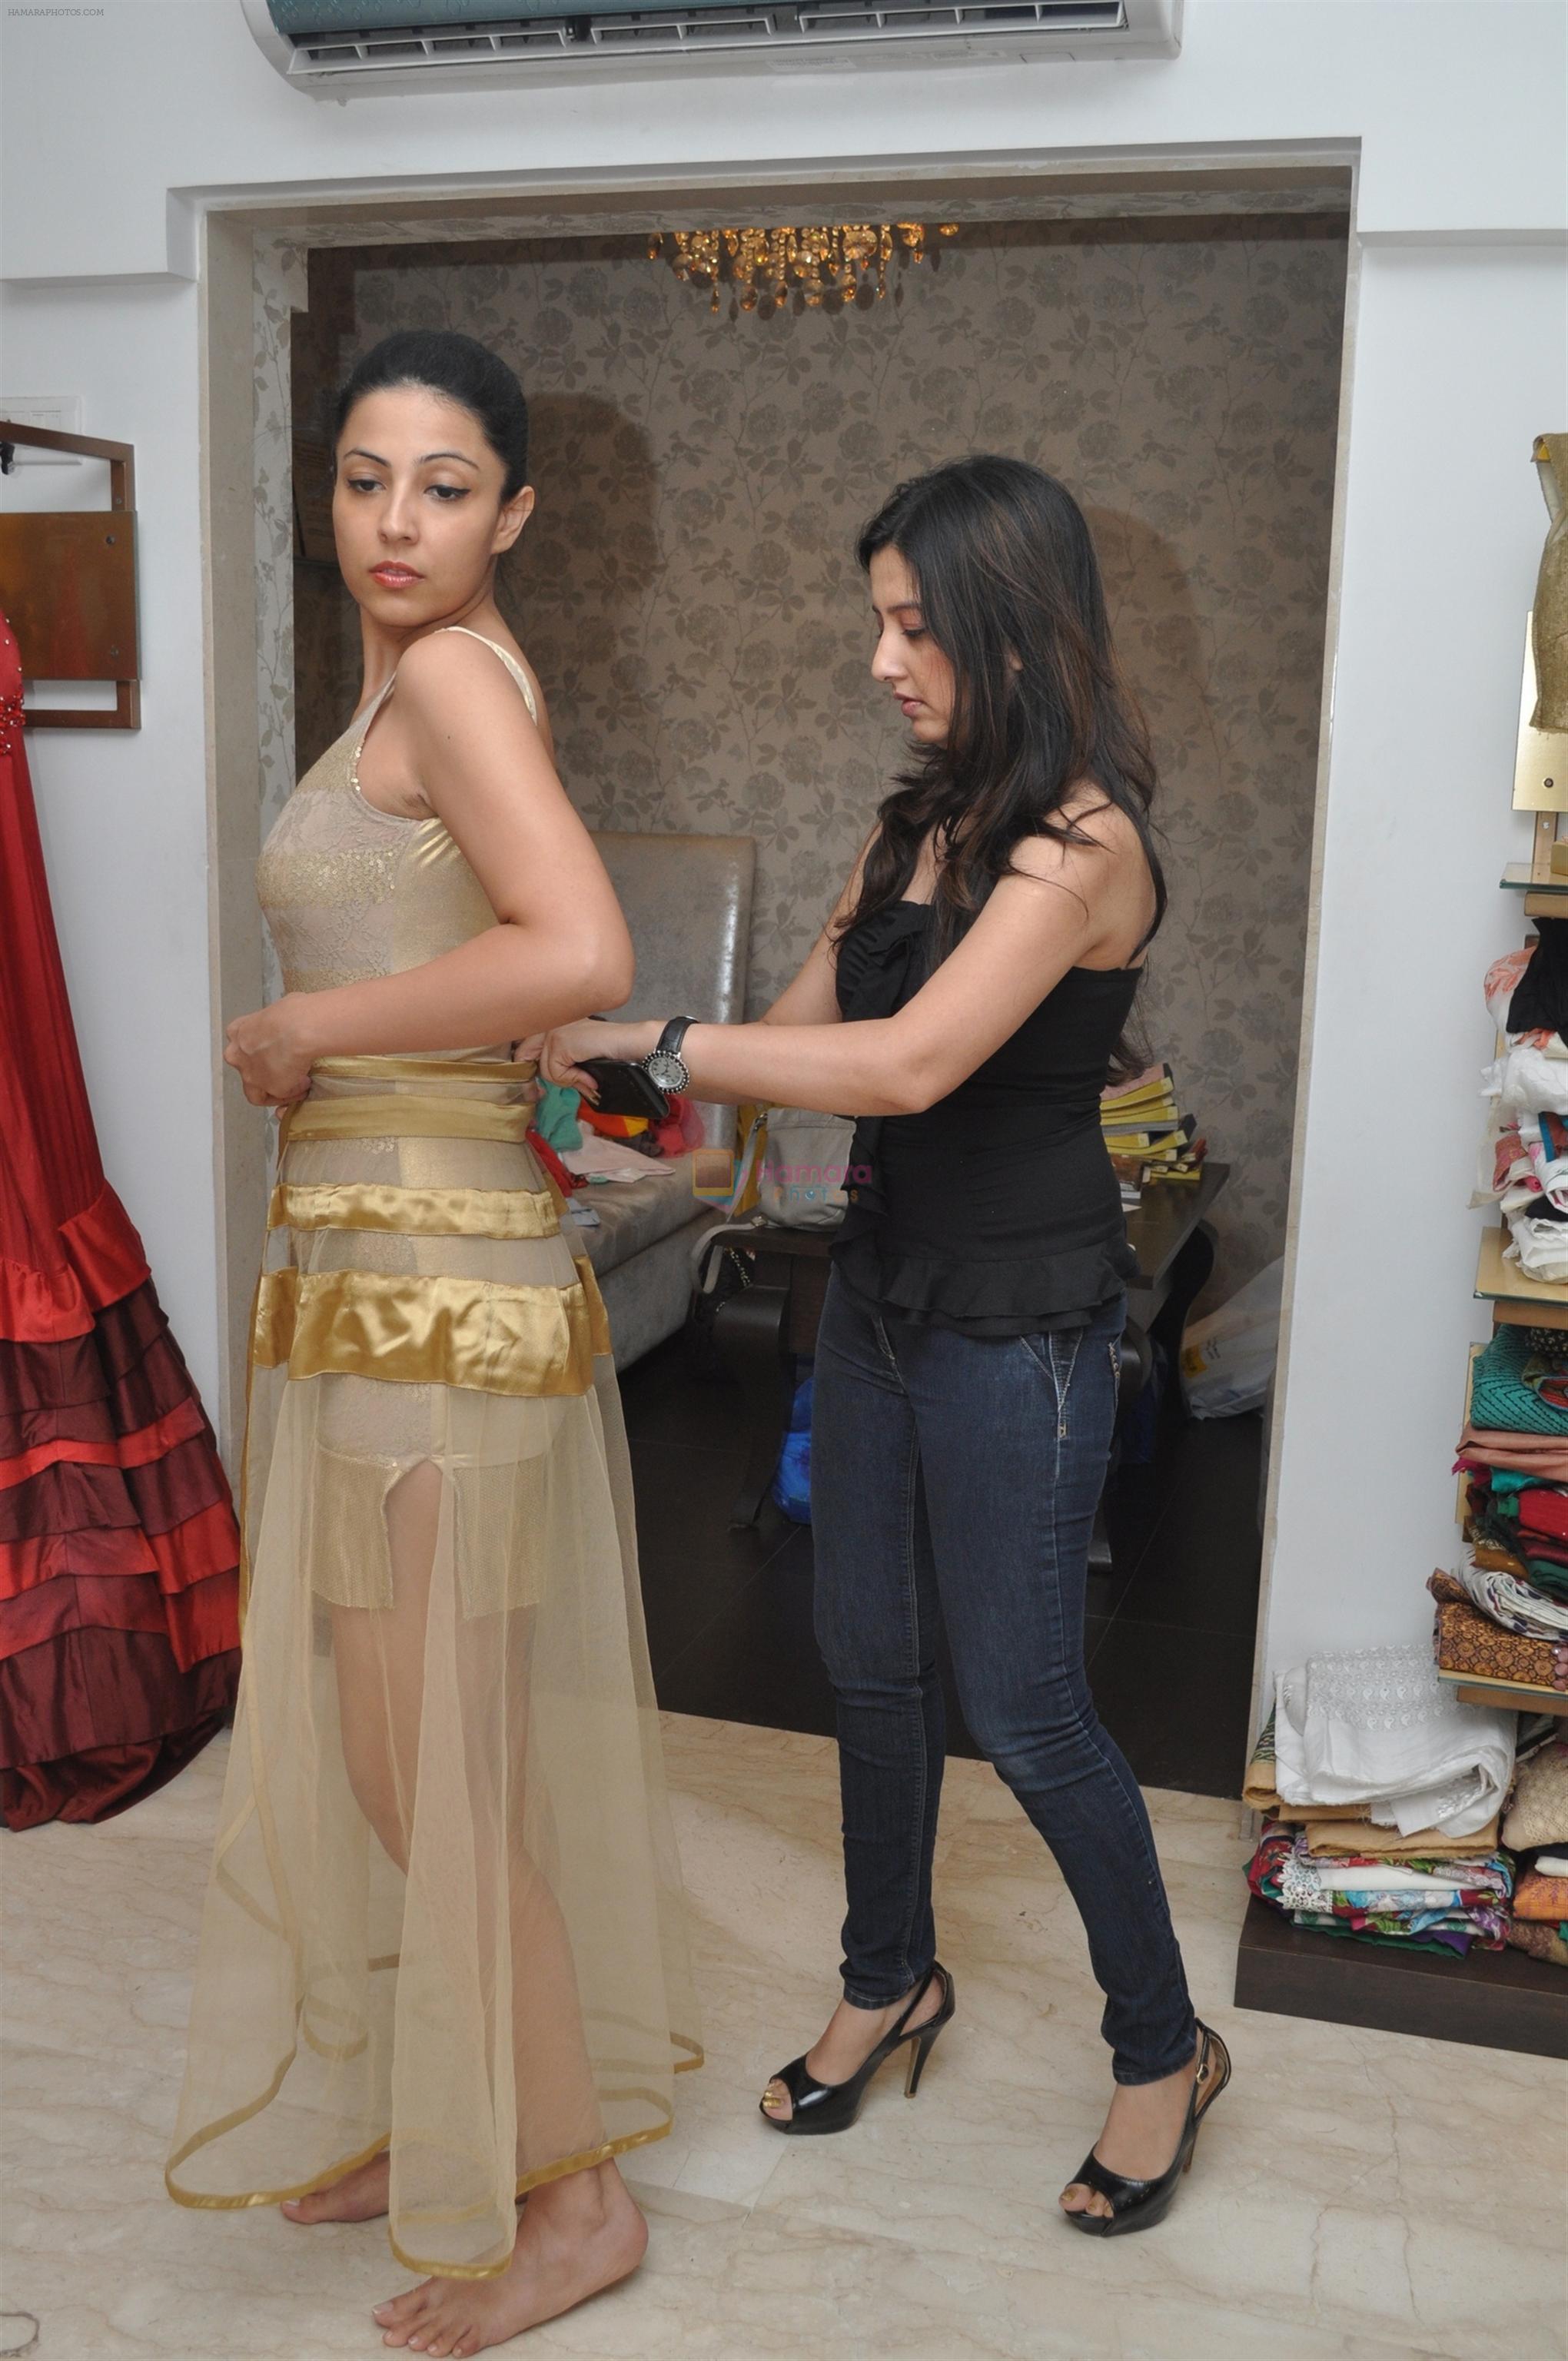 Amy Billimoria at Amy Billimoria's fittings of the models for her upcoming show sparkiling desires forever